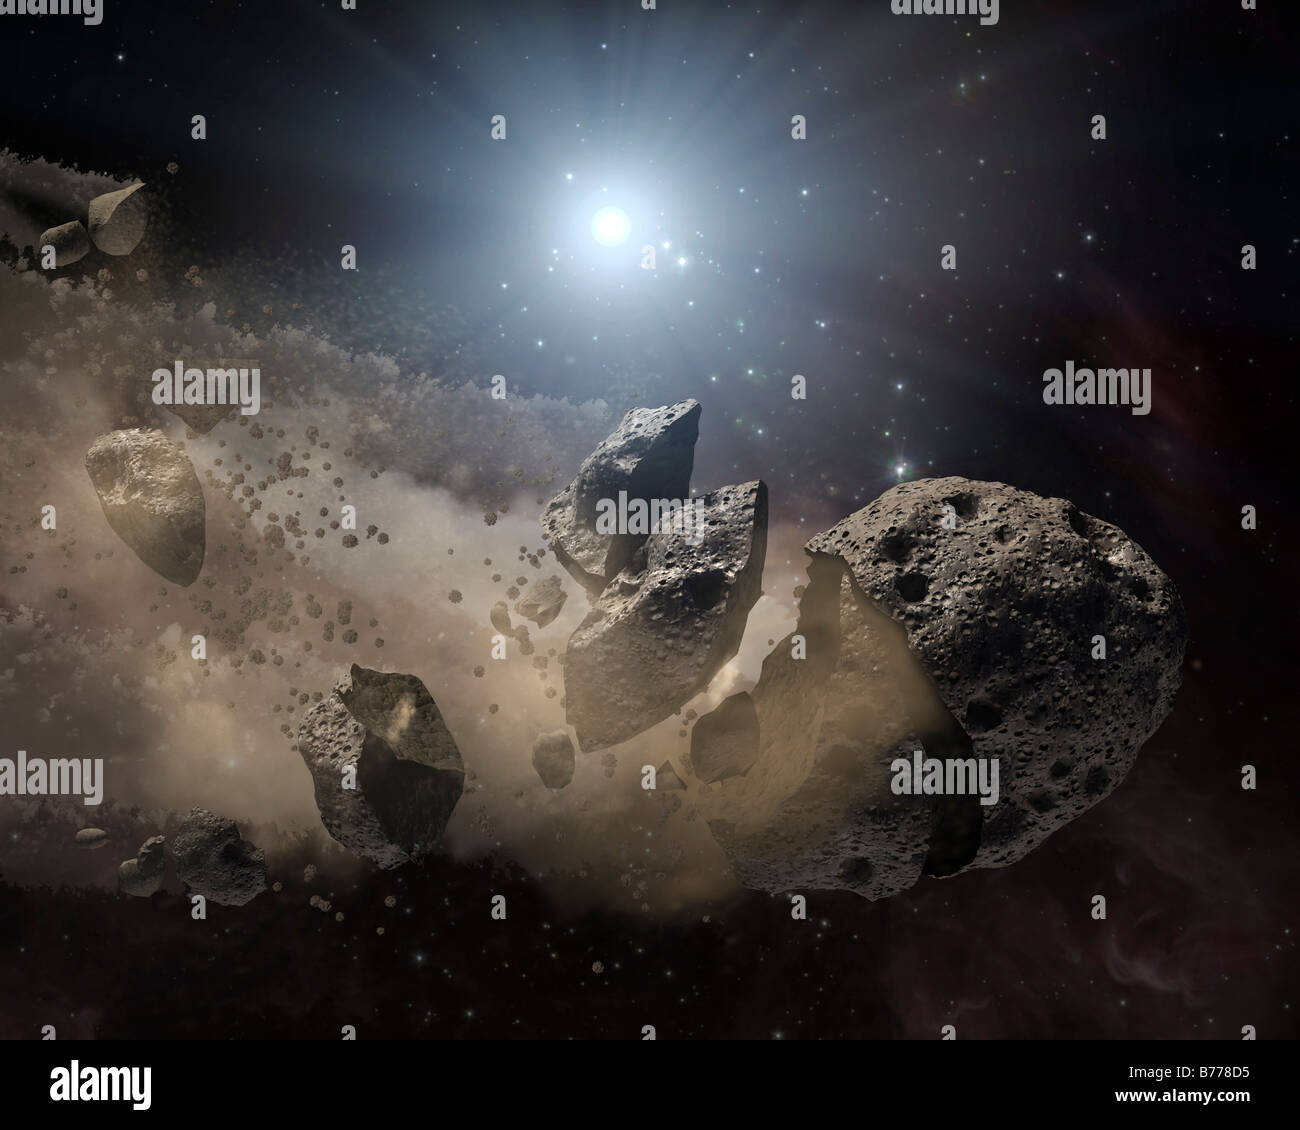 This artist's concept illustrates a dead star, or white dwarf, surrounded by the bits and pieces of a disintegrating asteroid. Stock Photo